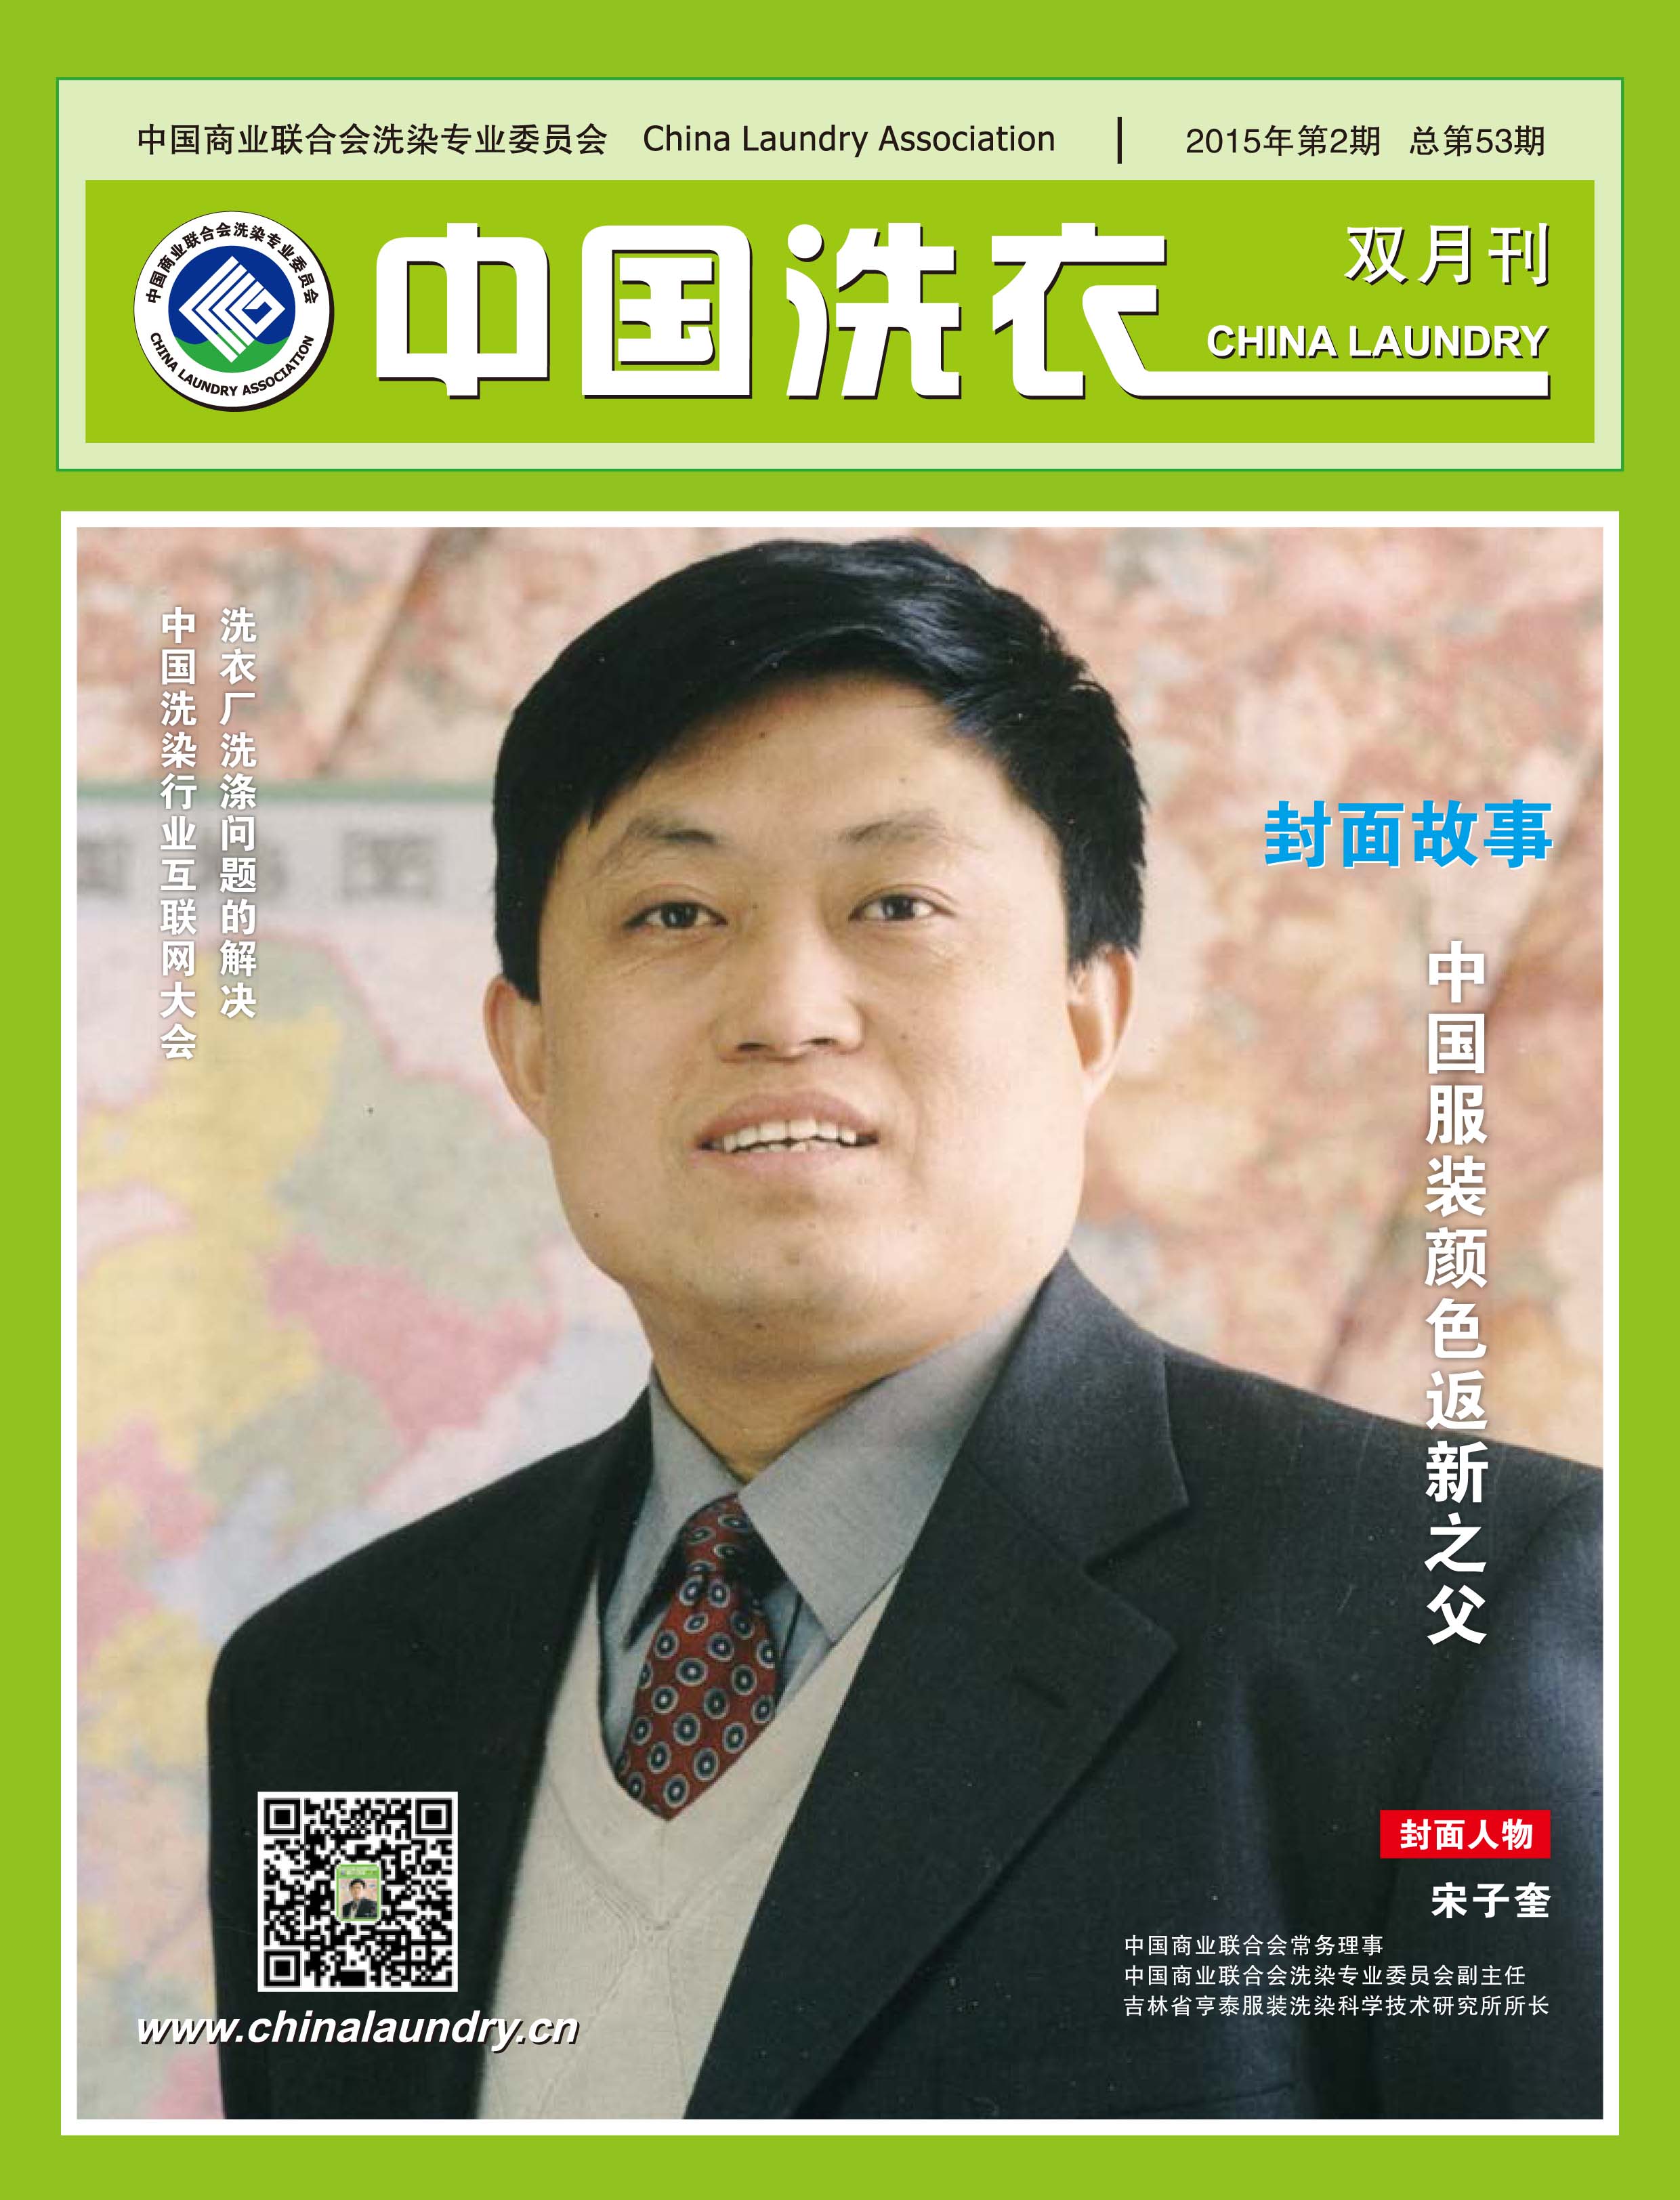 Issue 2, 2015